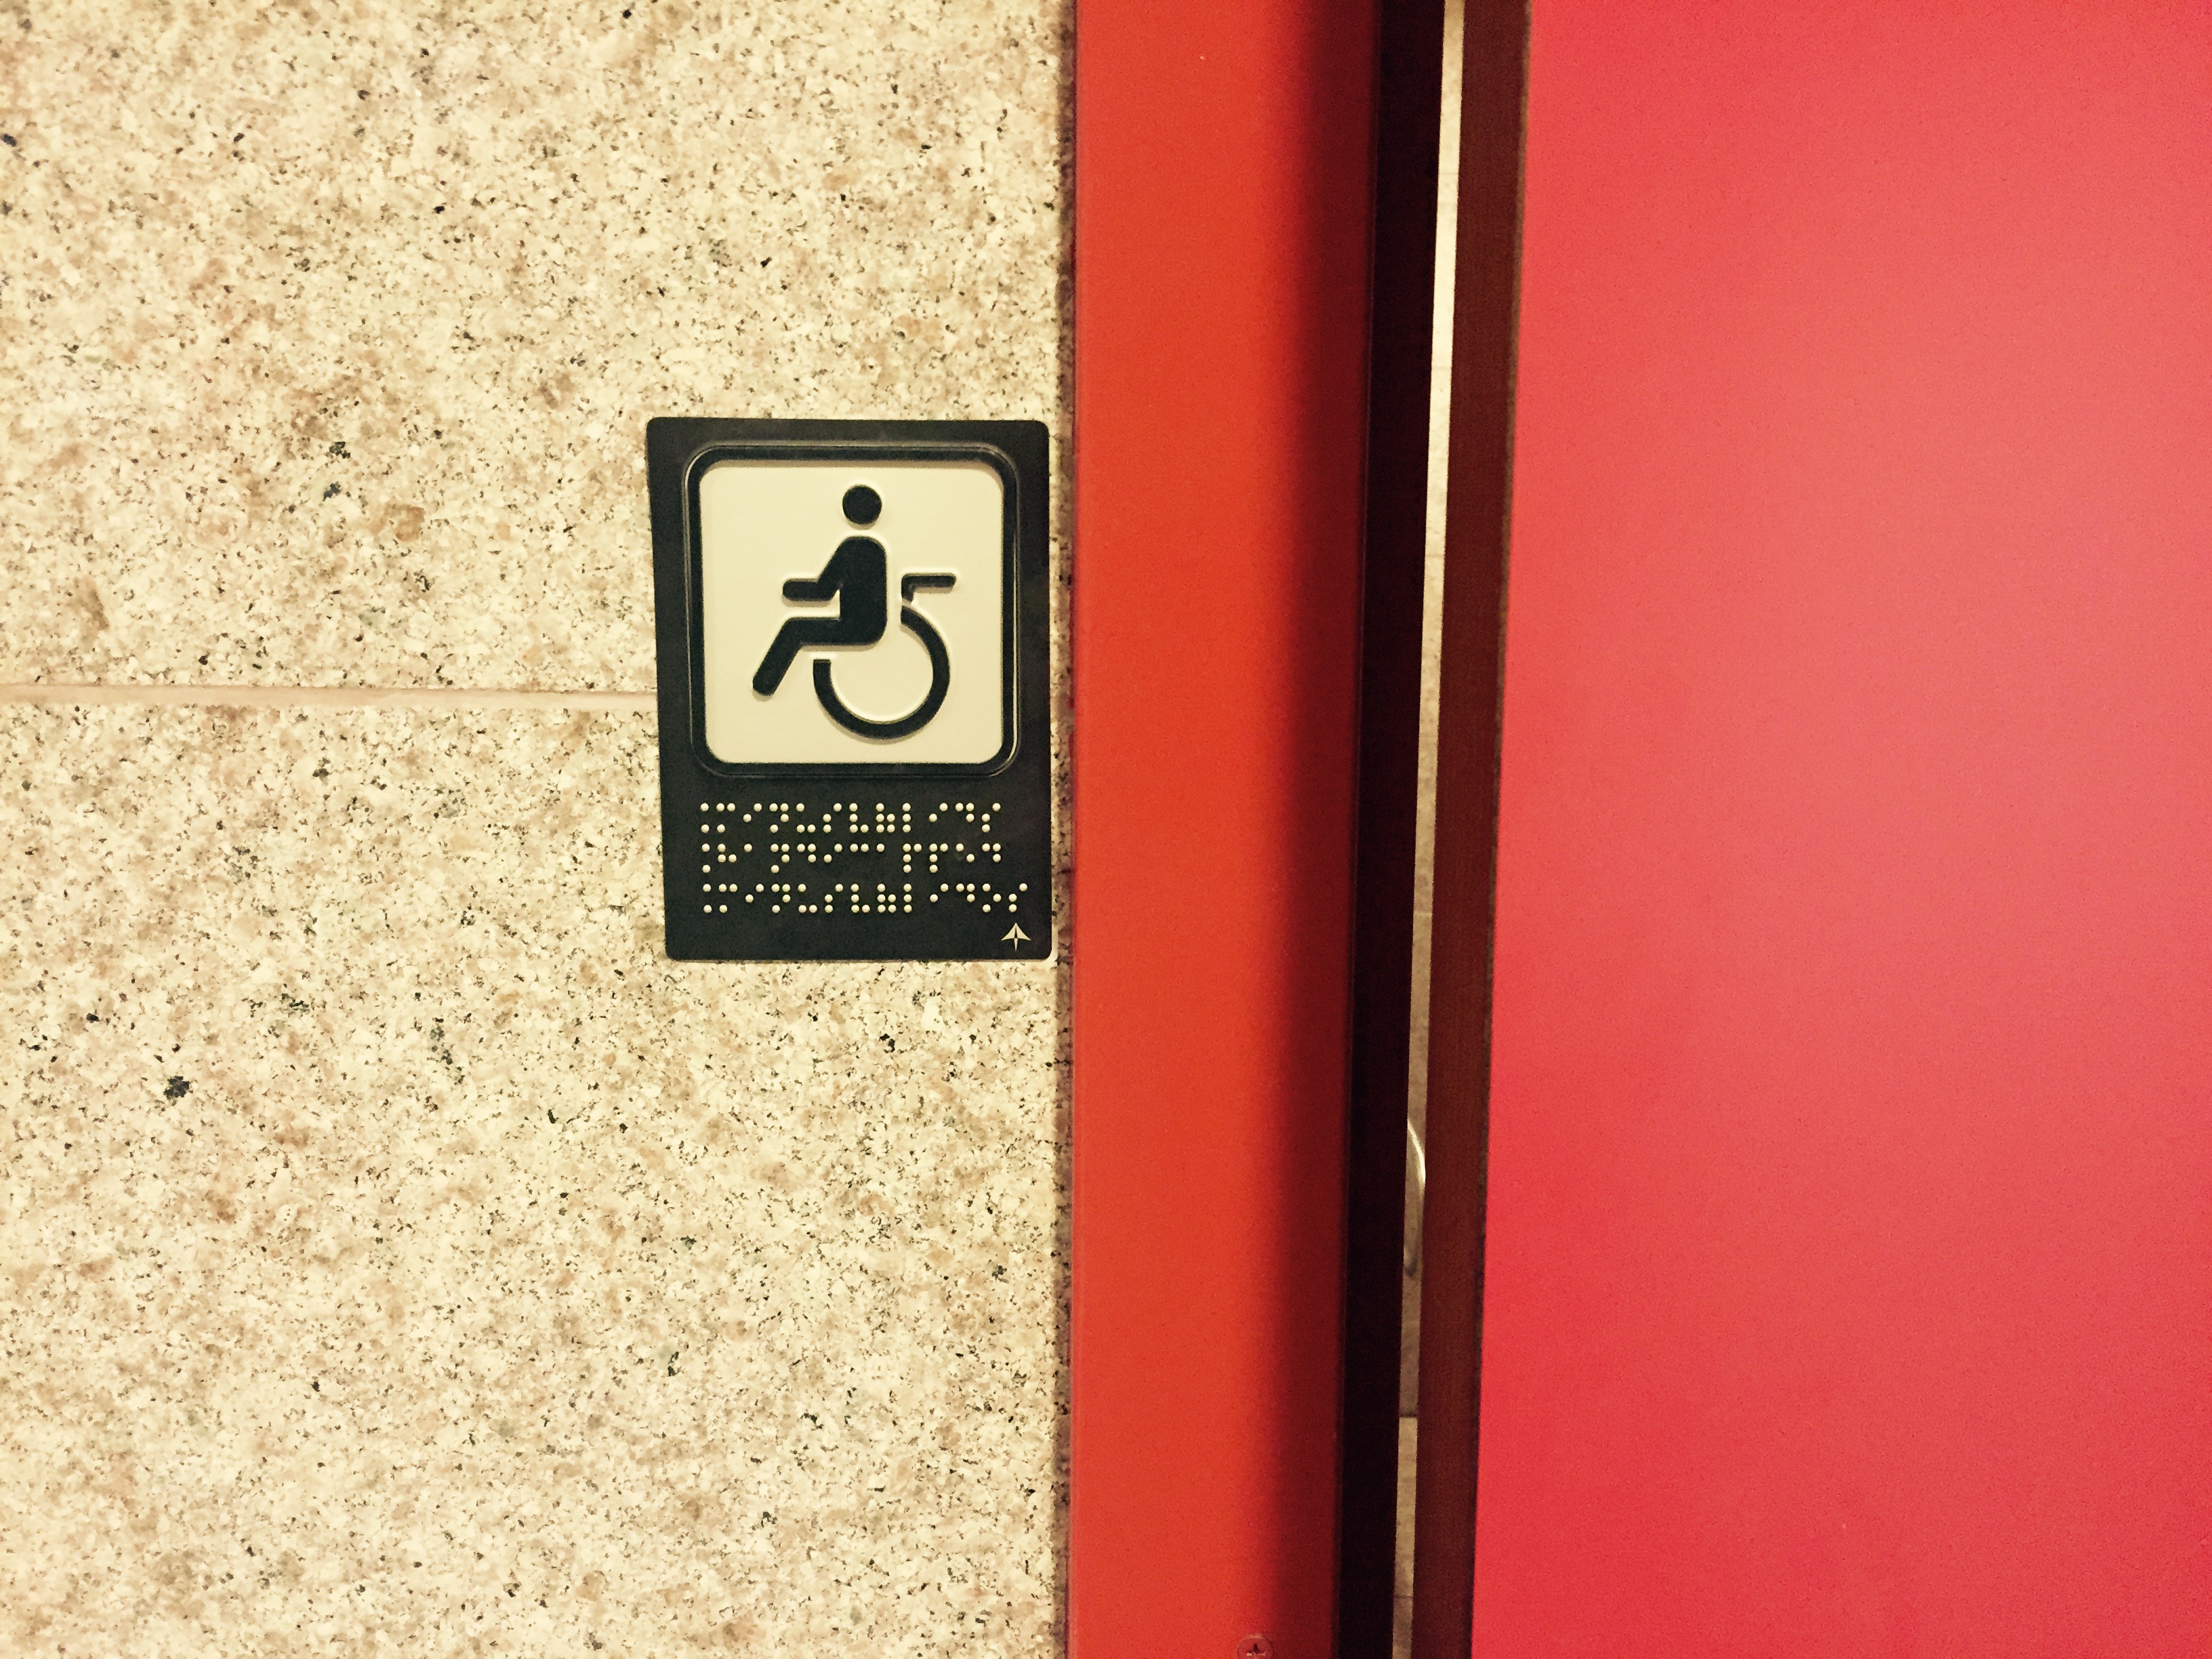 Barcelona’s El Prat Airport does not only have restrooms for PWDs, but these restrooms also have signs in Braille.